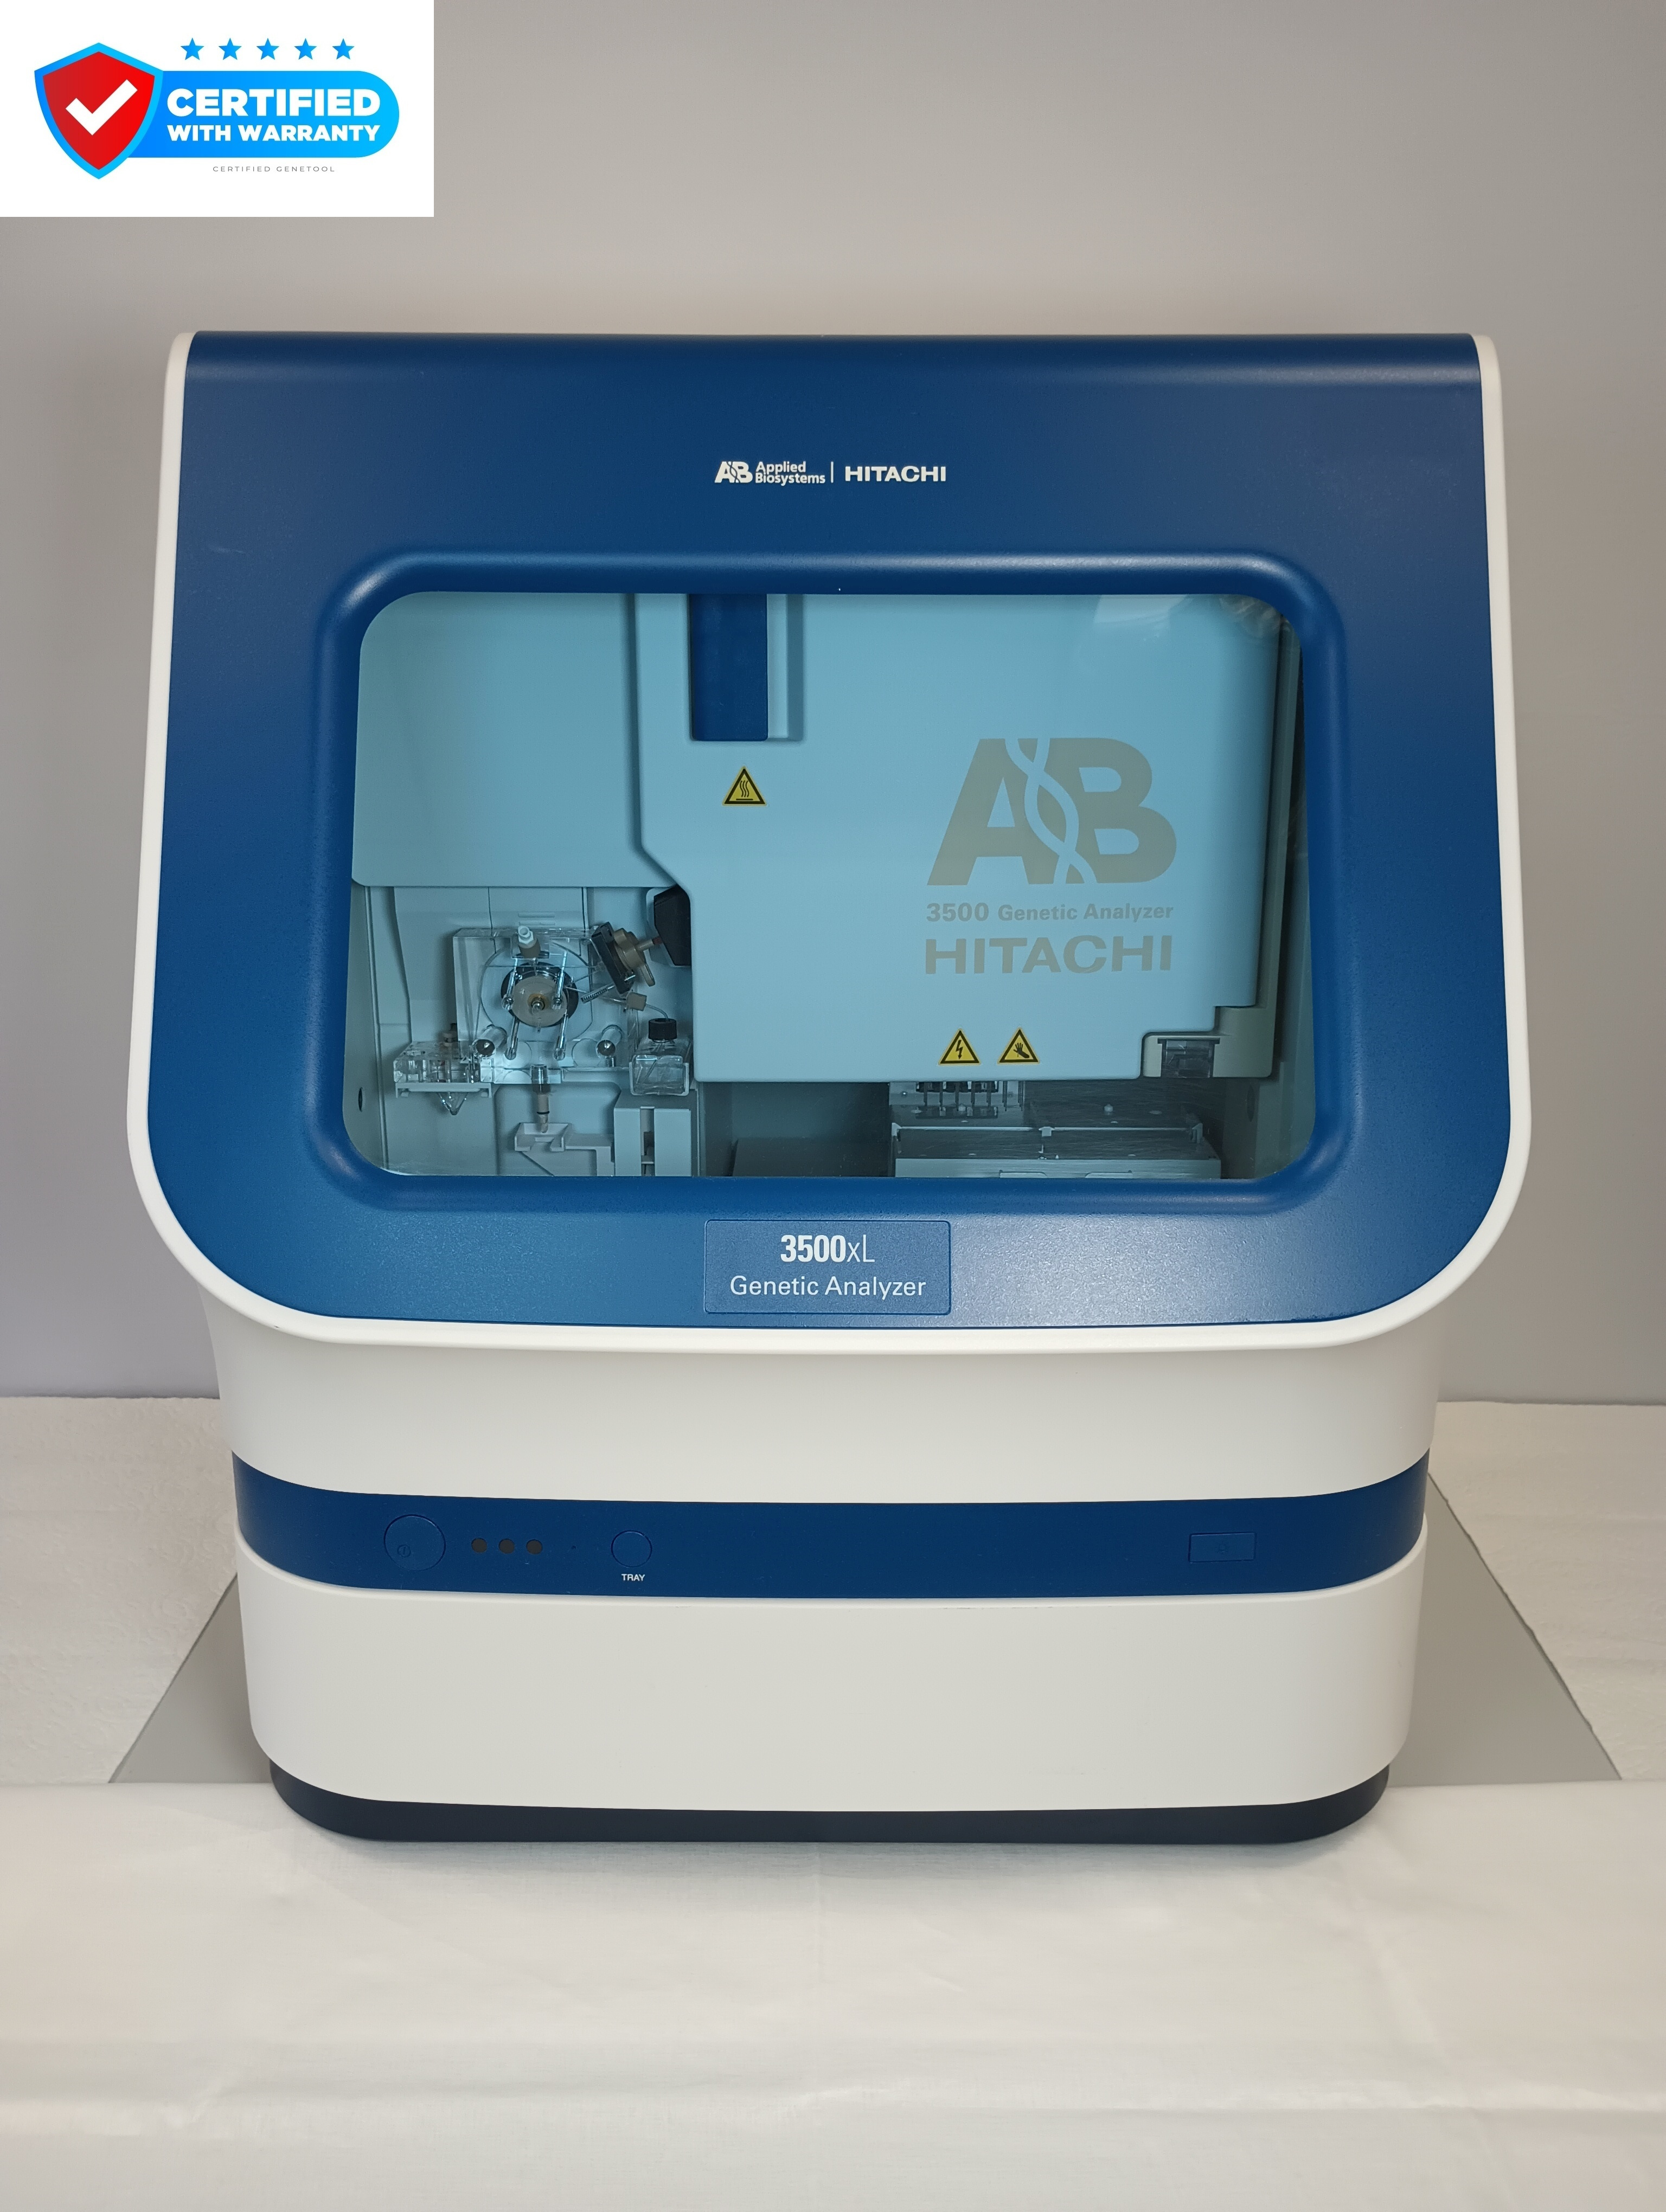 ABI 3500XL DNA Sequencer - Certified with Warranty